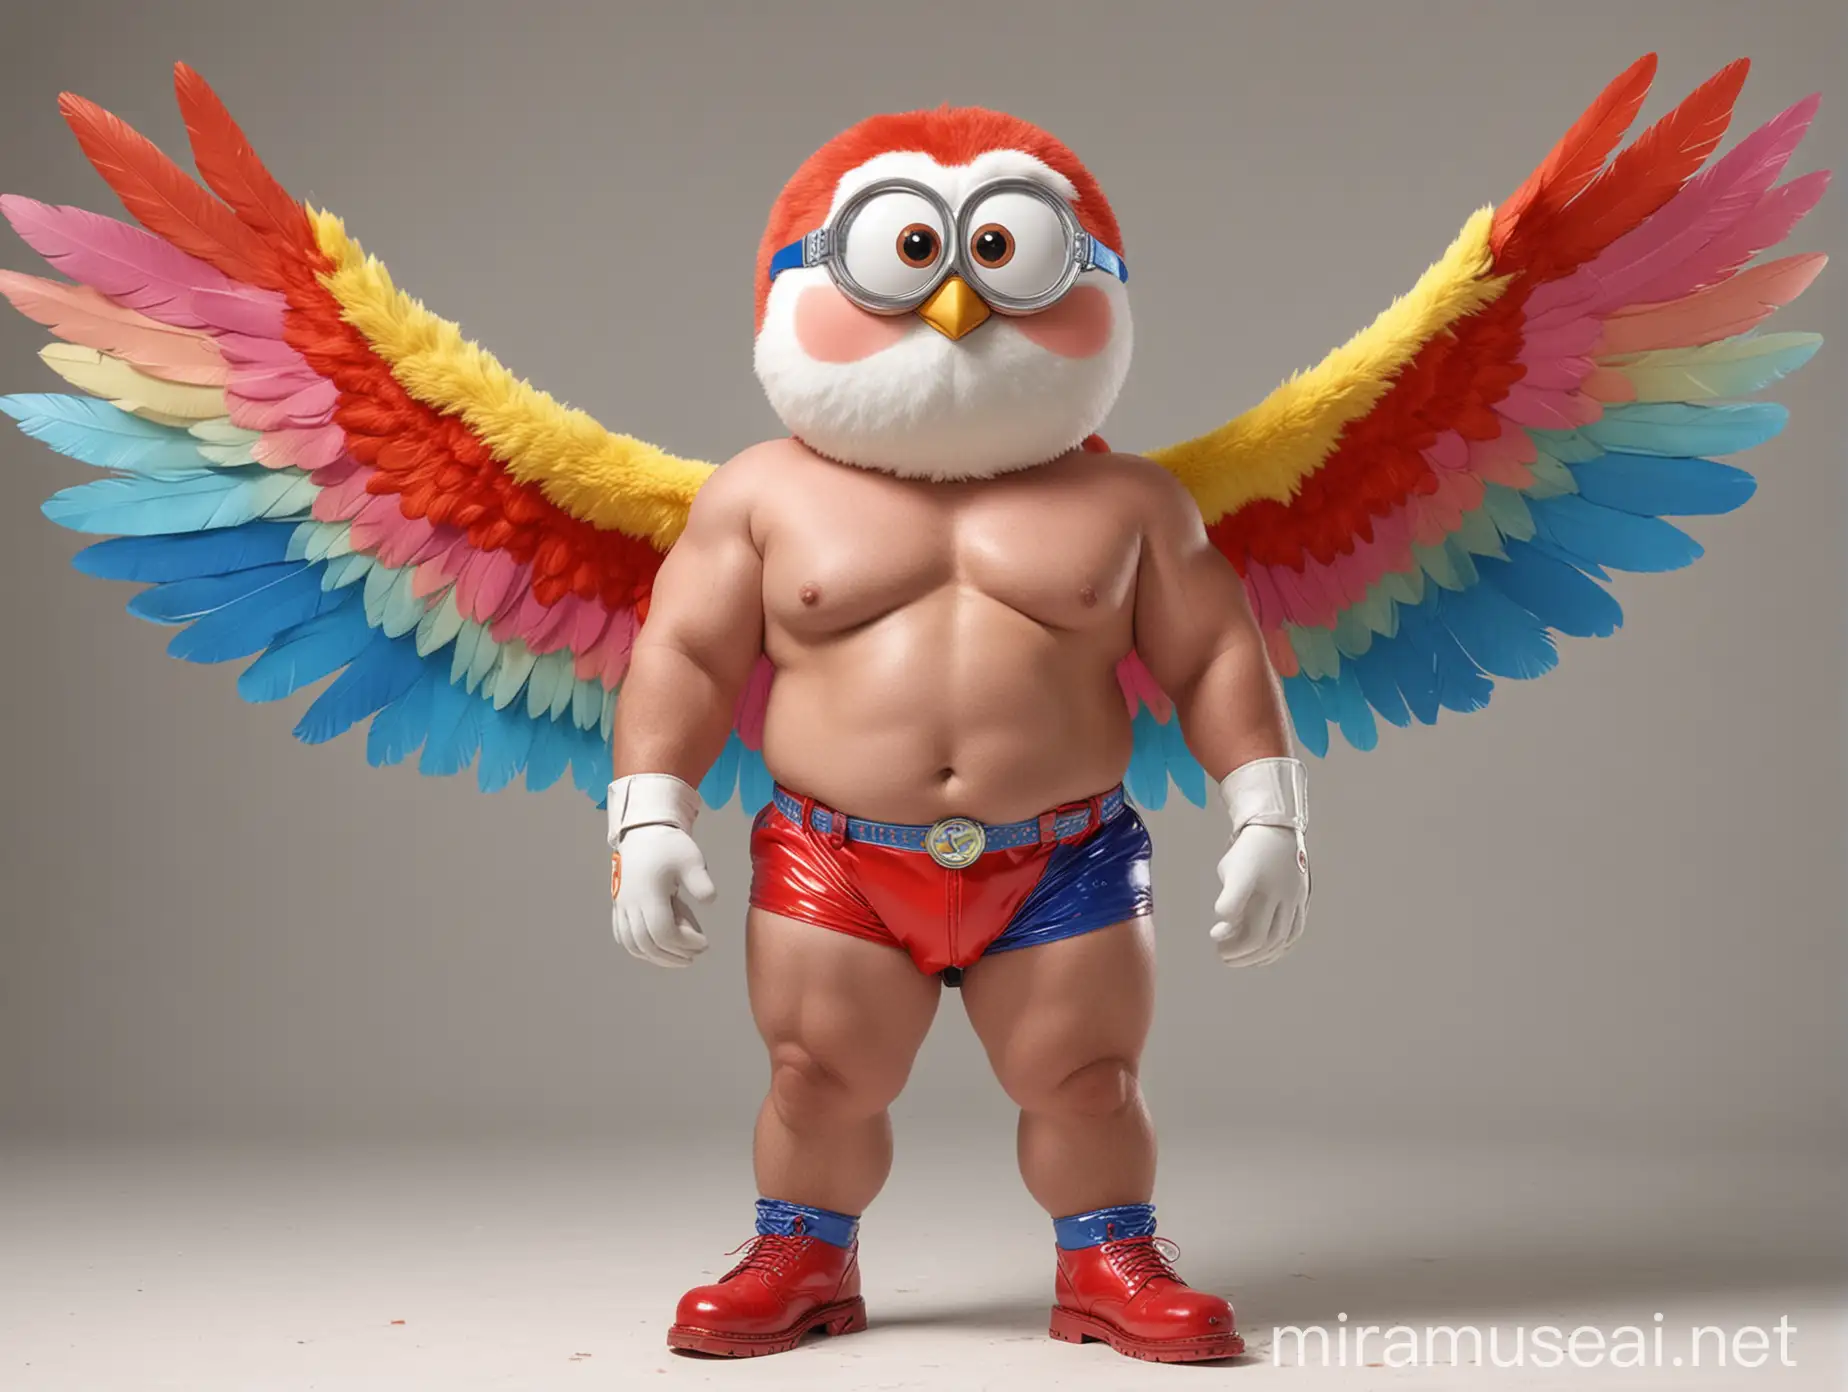 Studio Light Subtle Smile Topless 40s Ultra beefy Red Head Bodybuilder Daddy Big Eyes with Beard Wearing Multi-Highlighter Bright Rainbow Colored See Through huge Eagle Wings Shoulder Jacket short shorts long legs low leather boots and Flexing his Big Strong Arm Up with Doraemon Goggles on forehead